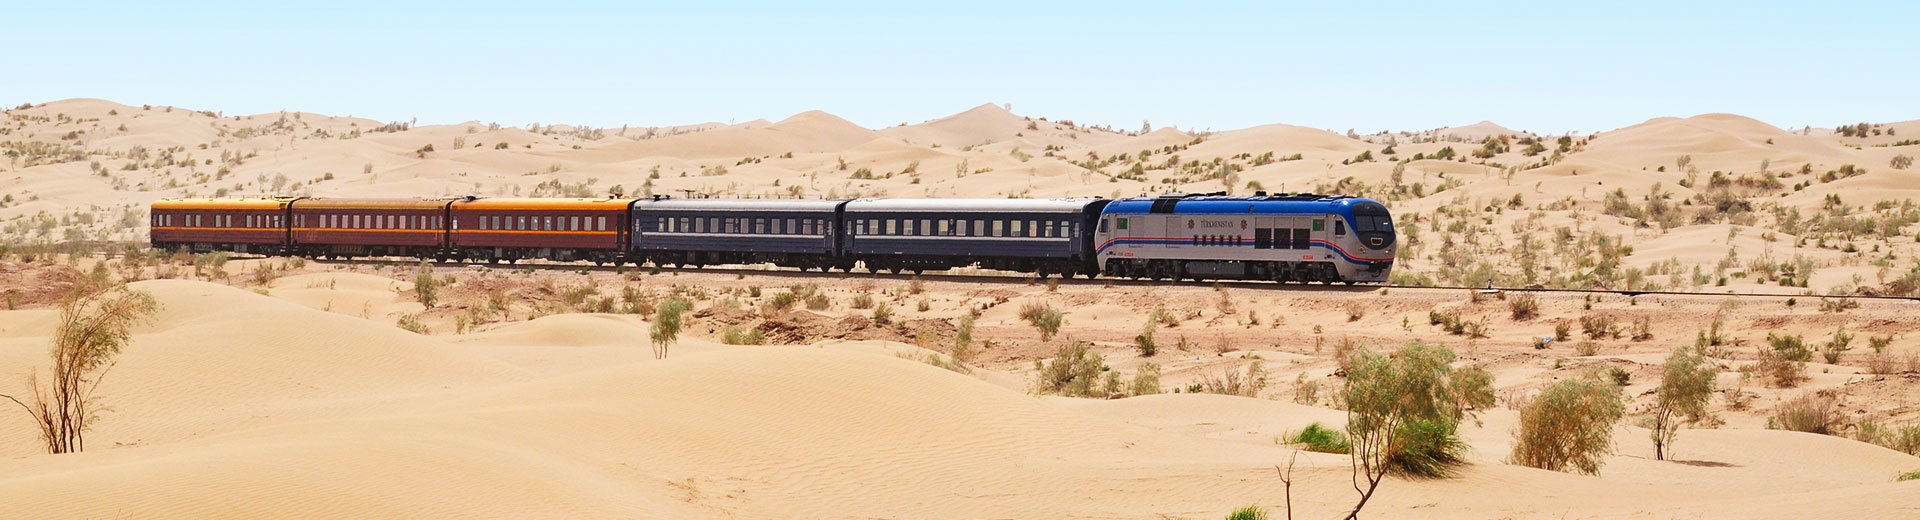 10 / 12 Days Silk Road Train Tour by China Orient Express